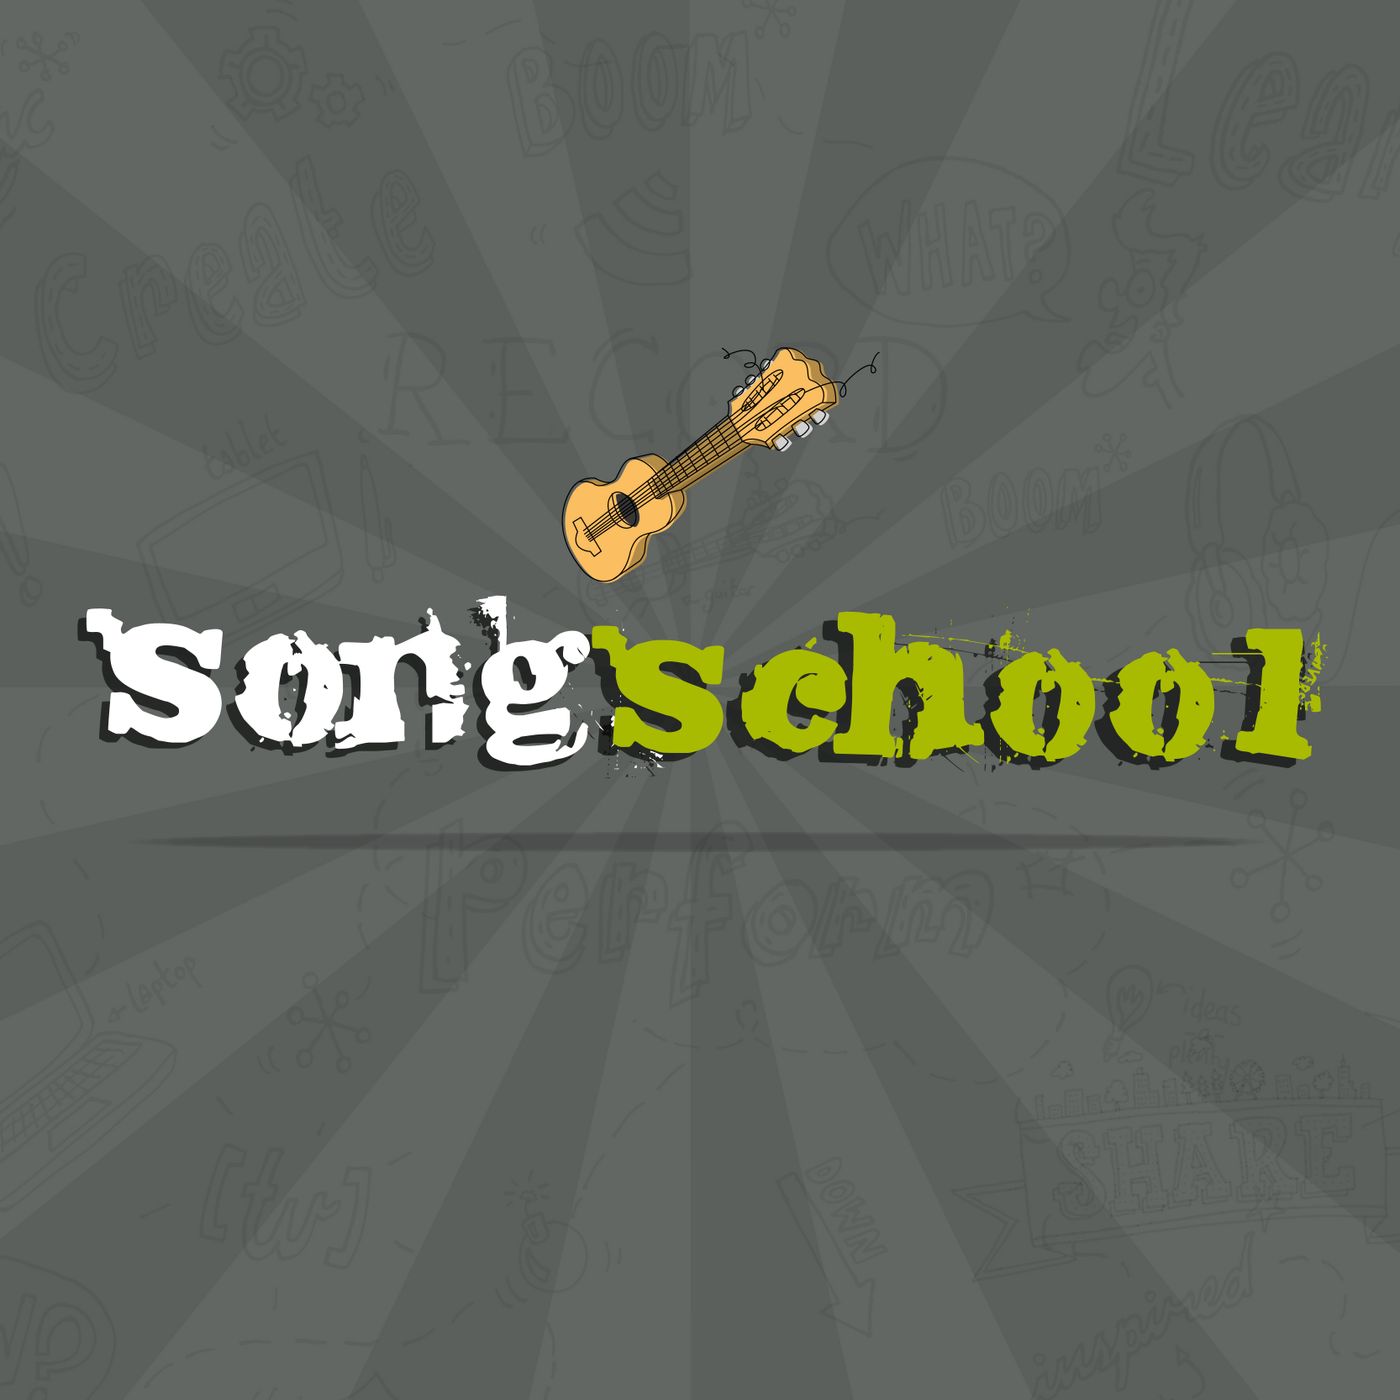 The Songschool Show @ Athenry VEC